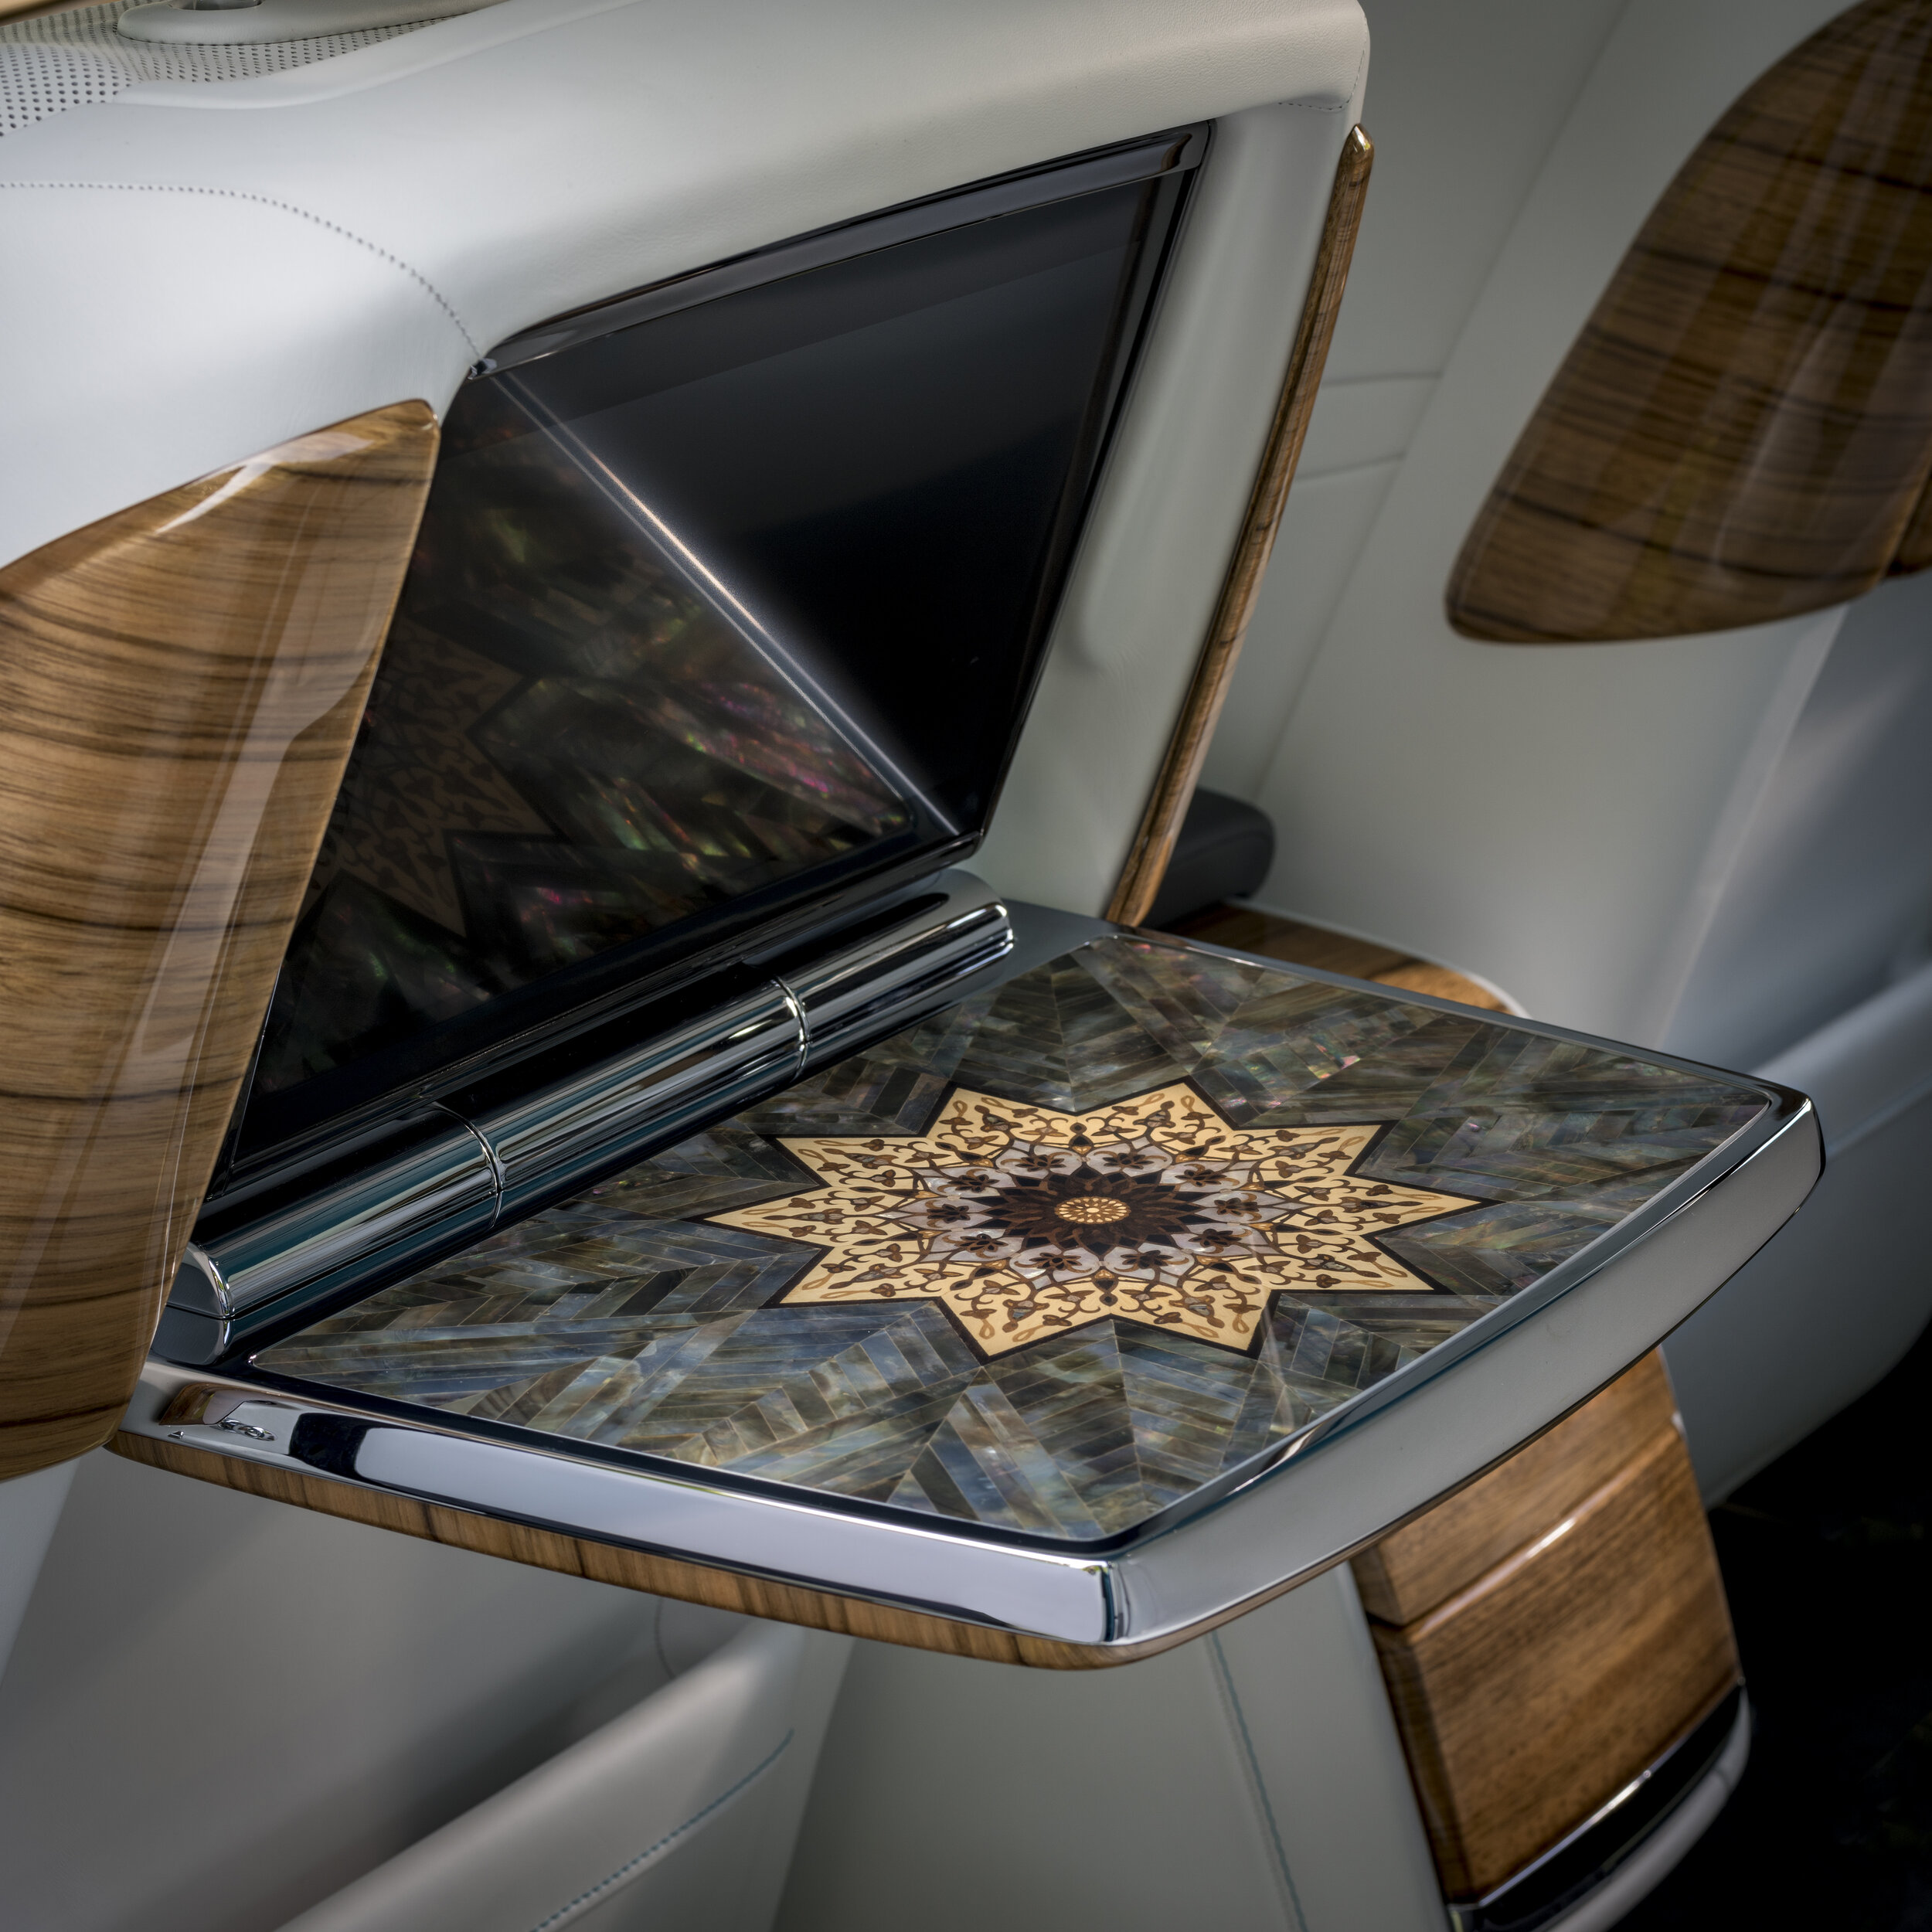   Like a priceless pearl in the making, intricate details, layers of luxury are are the essence of every bespoke luxury Rolls-Royce  